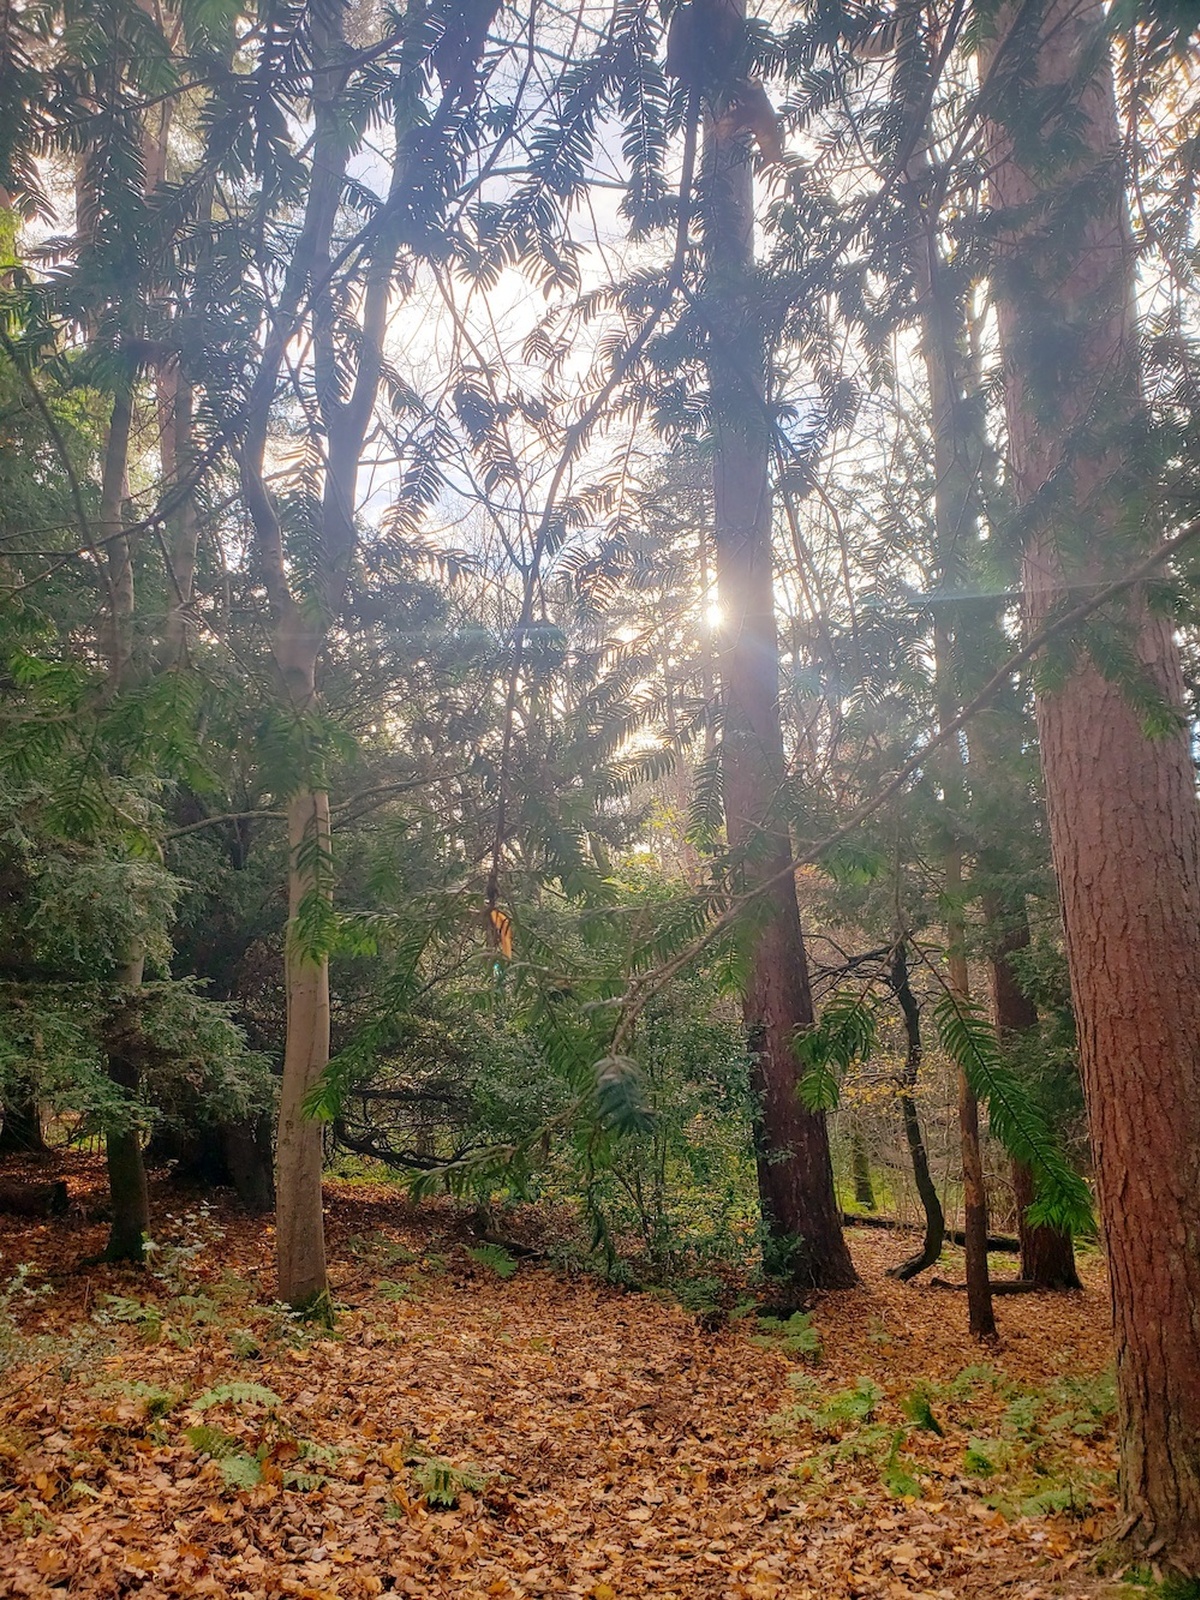 A photograph of a forest with tall trees, sunlight peaks through the branches.